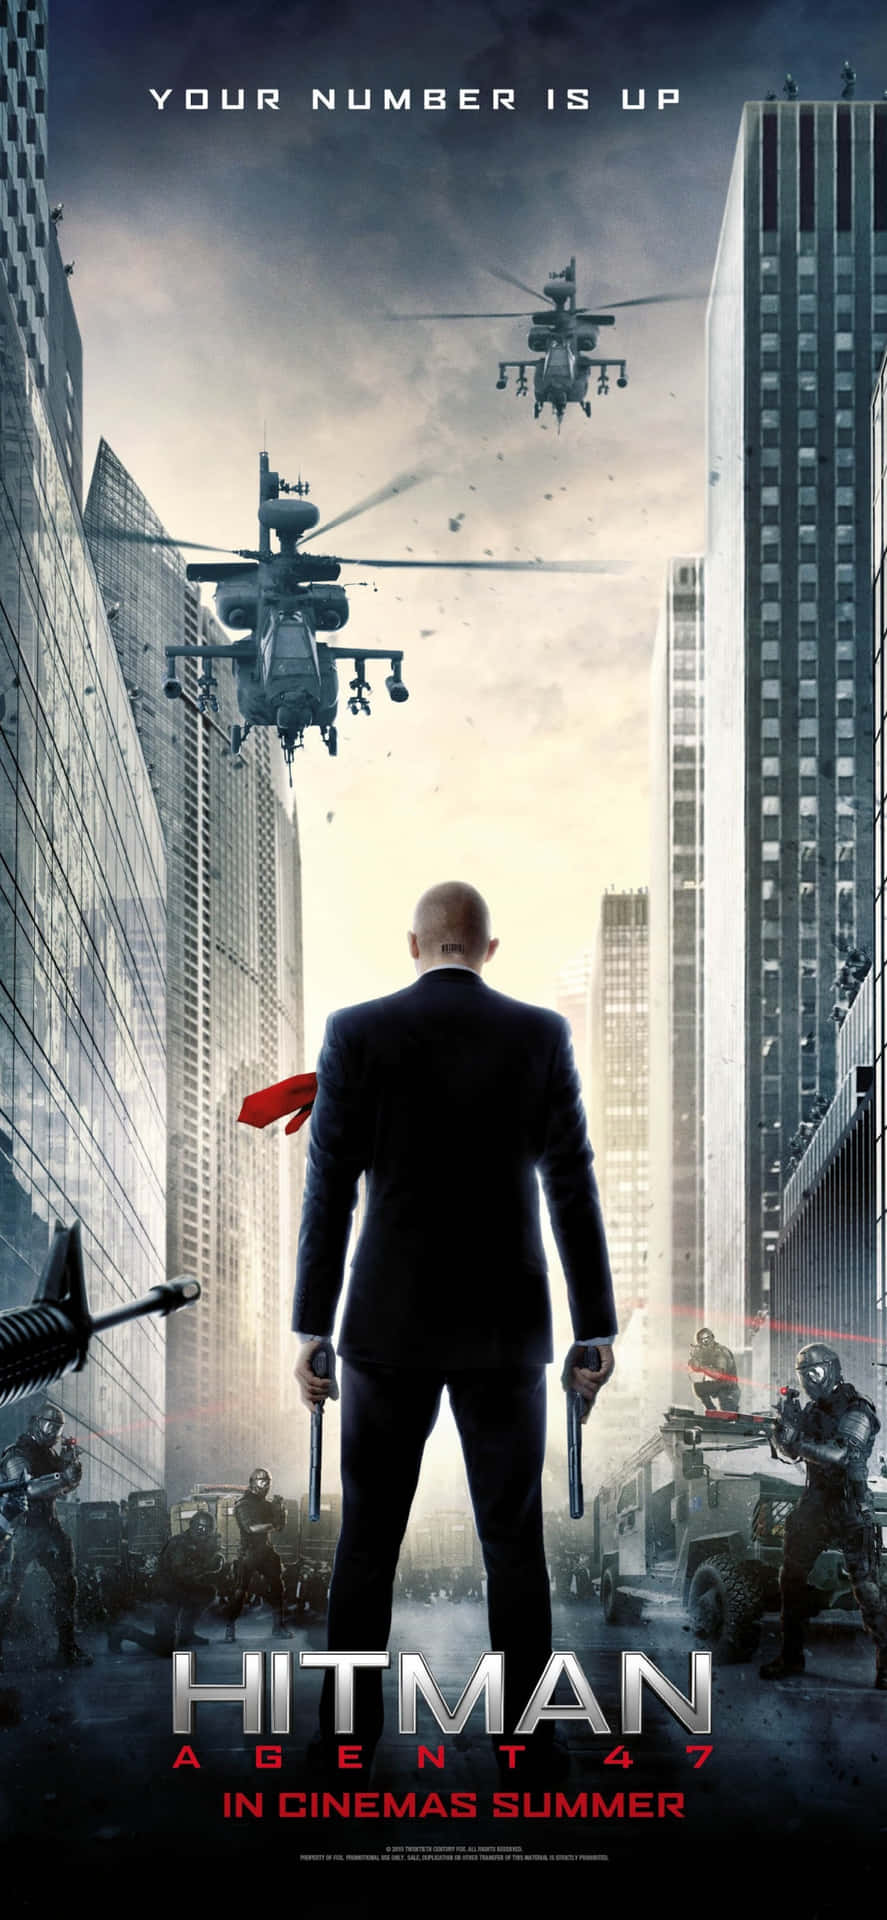 Hitman Agent 47 Your Number Is Up Wallpaper